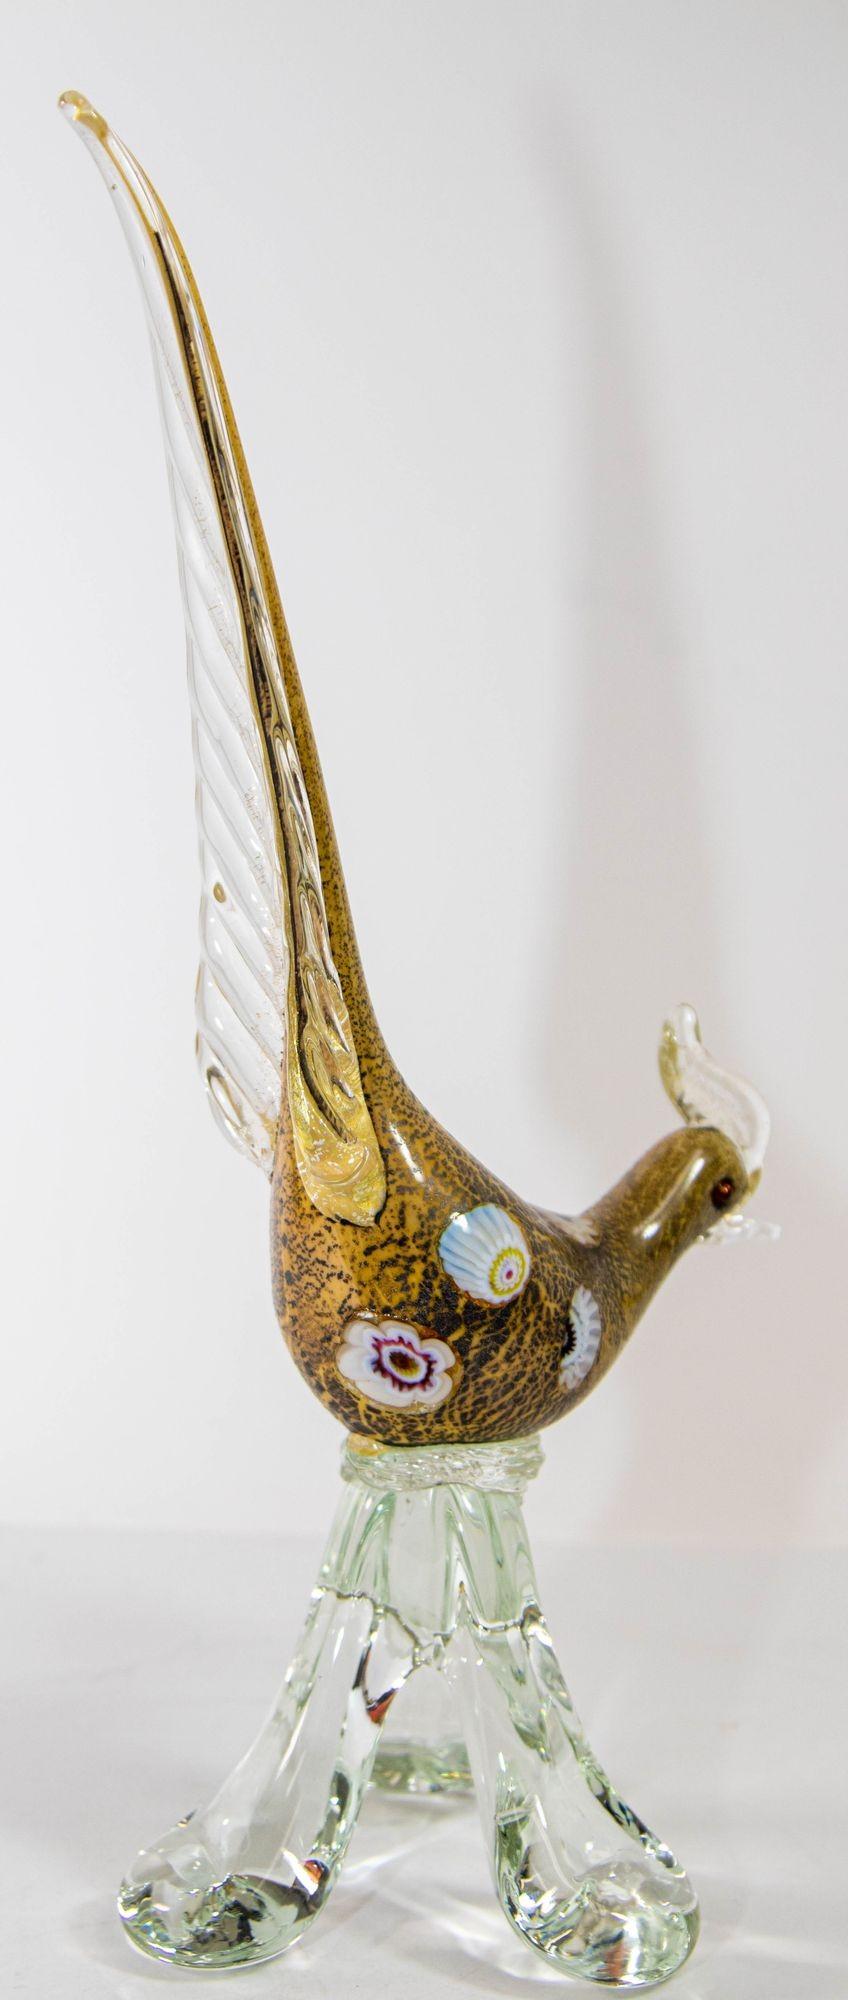 Italian Murano Art Glass Pheasant Bird Sculpture 1960s In Good Condition For Sale In North Hollywood, CA